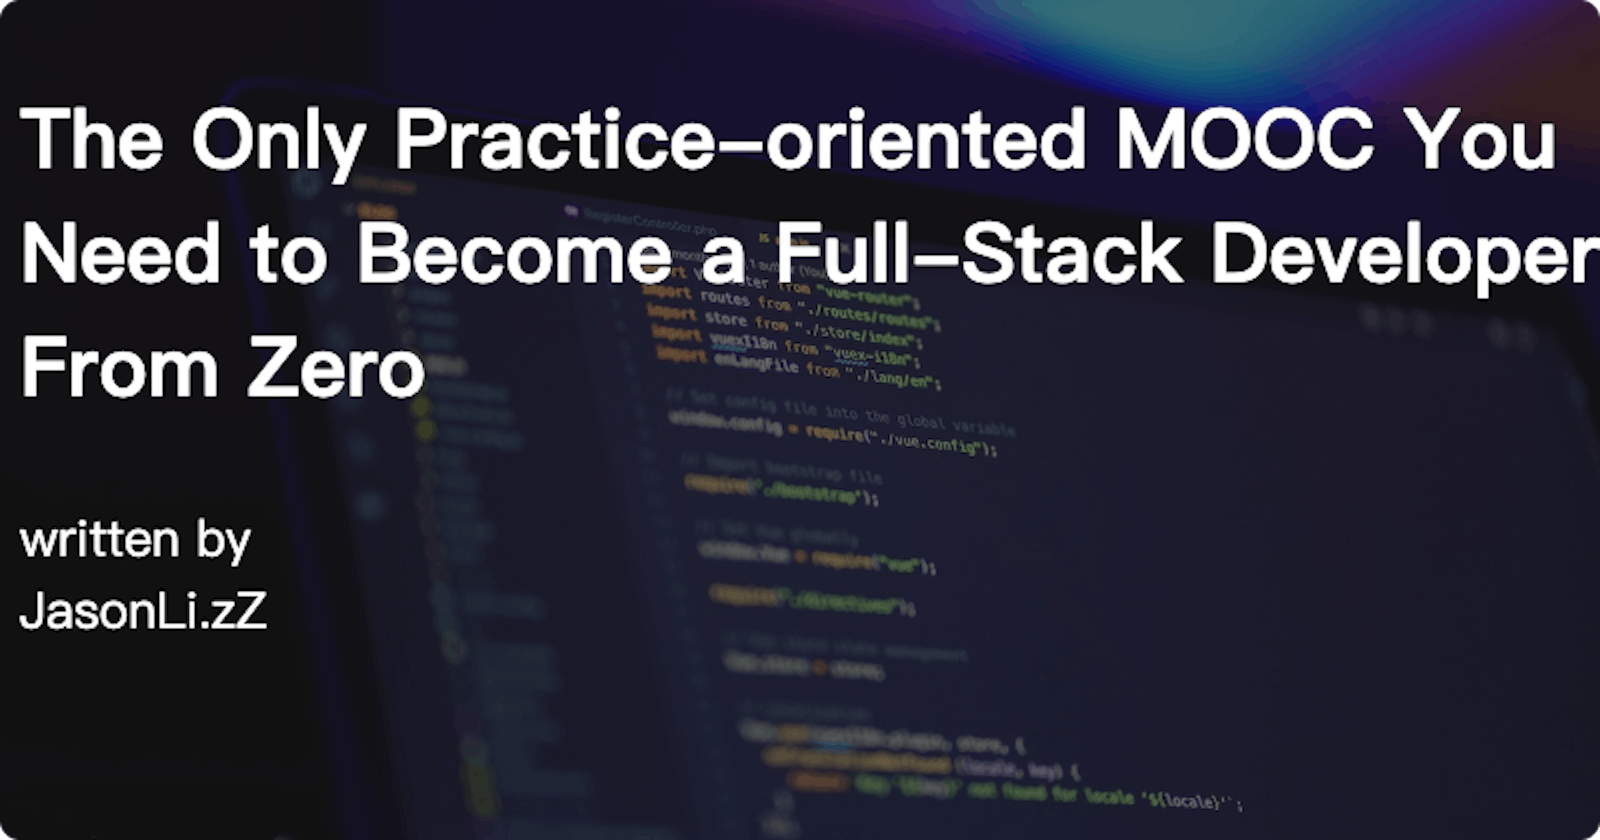 The Only Practice-oriented MOOC You Need to Become a Full-Stack Developer From Zero